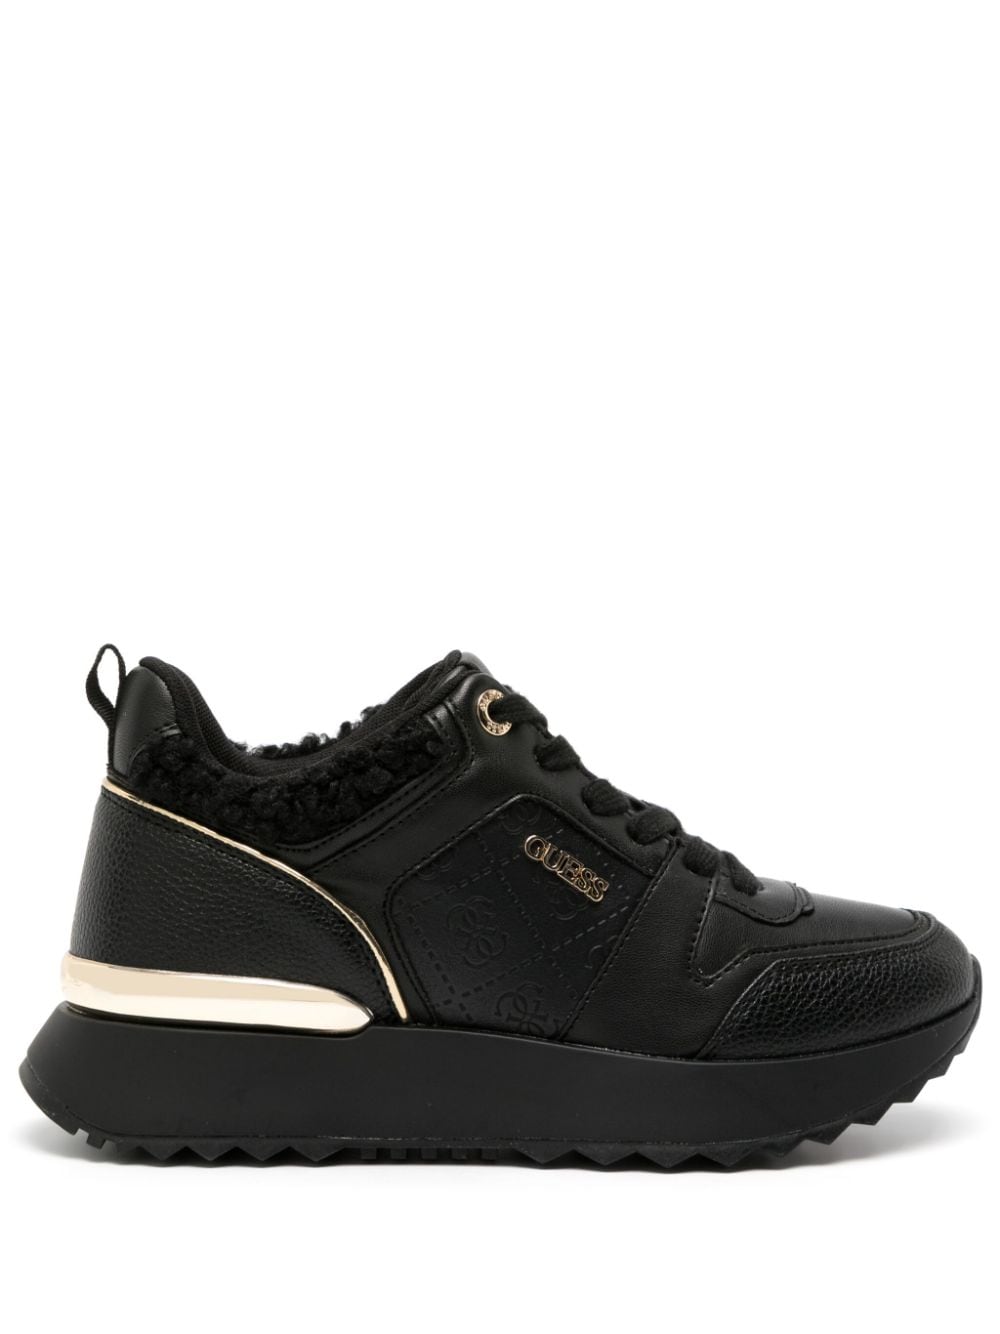 Guess Usa Kaddy2 Hardware-detail Trainers In Black